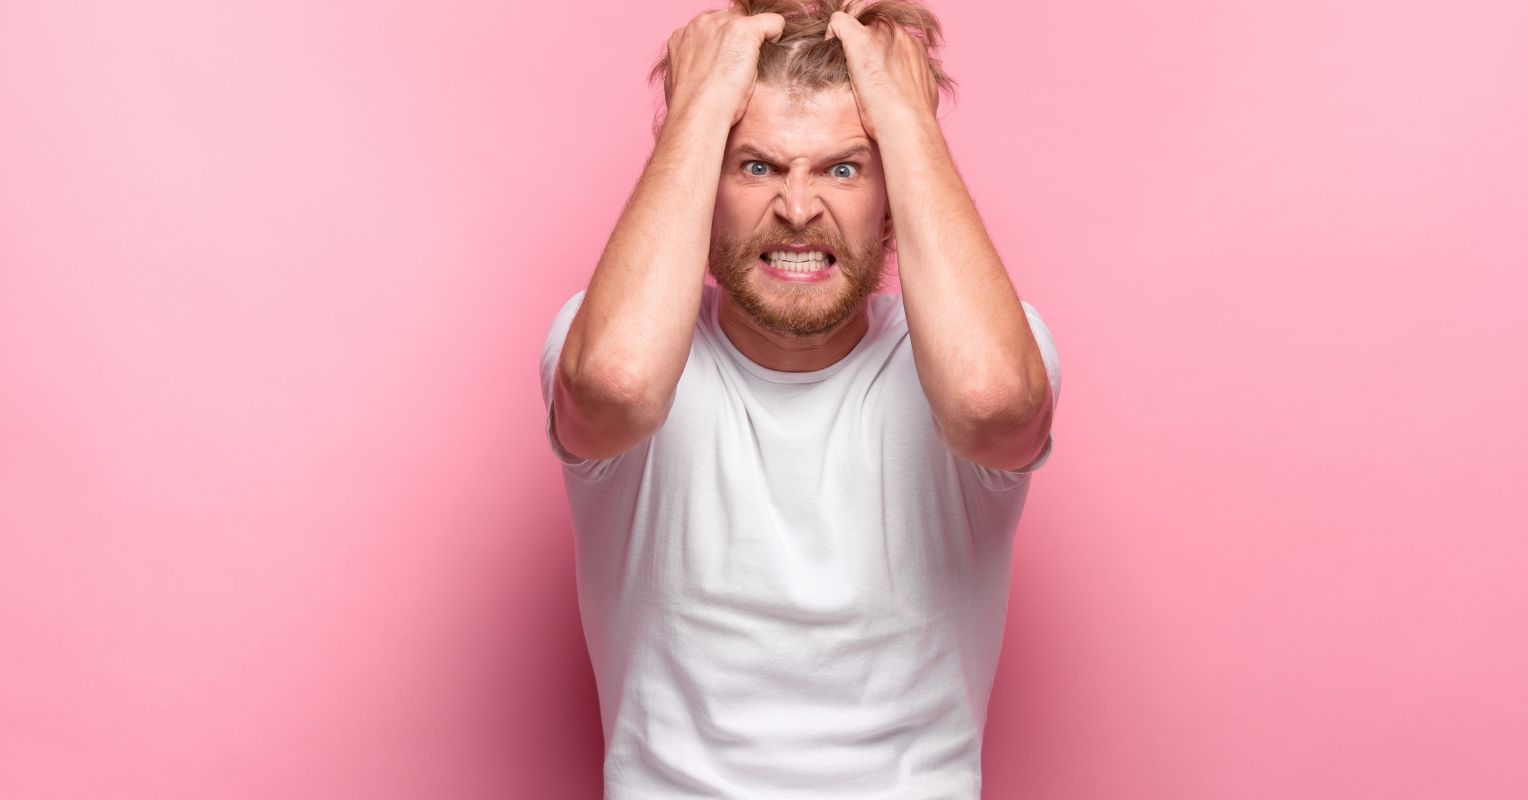 Angry Men and the Women Who Love Them | Psychology Today